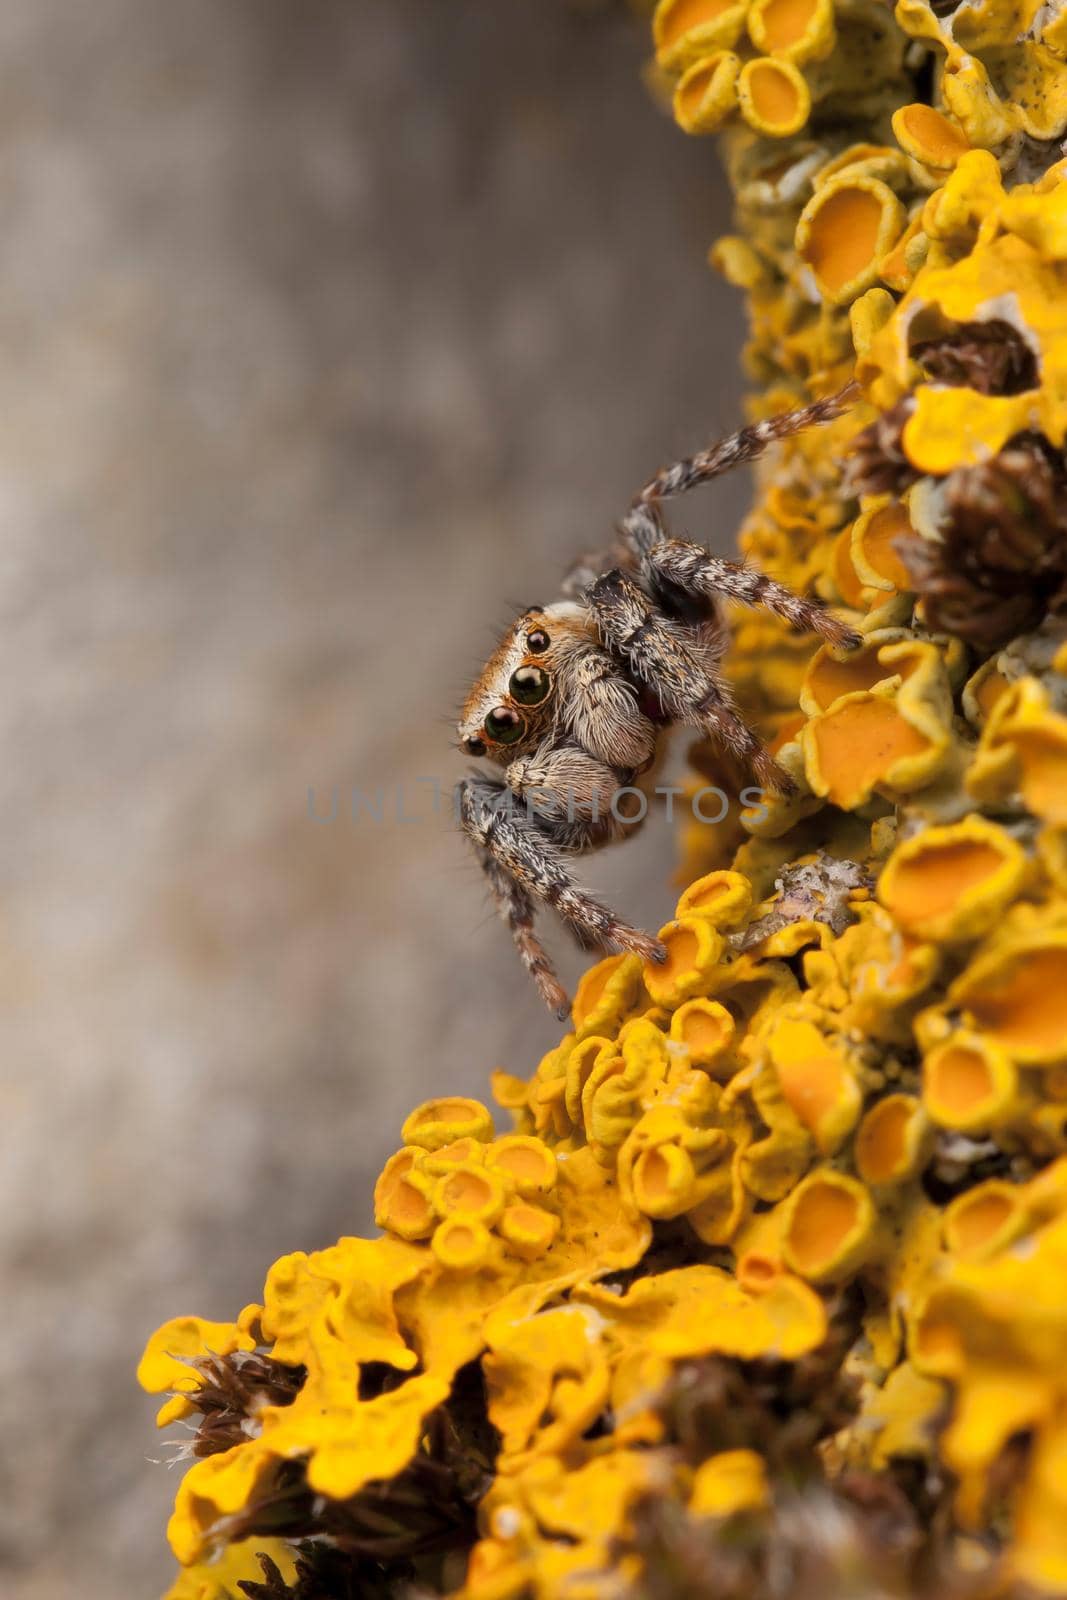 Jumping spider in yellow lichens 